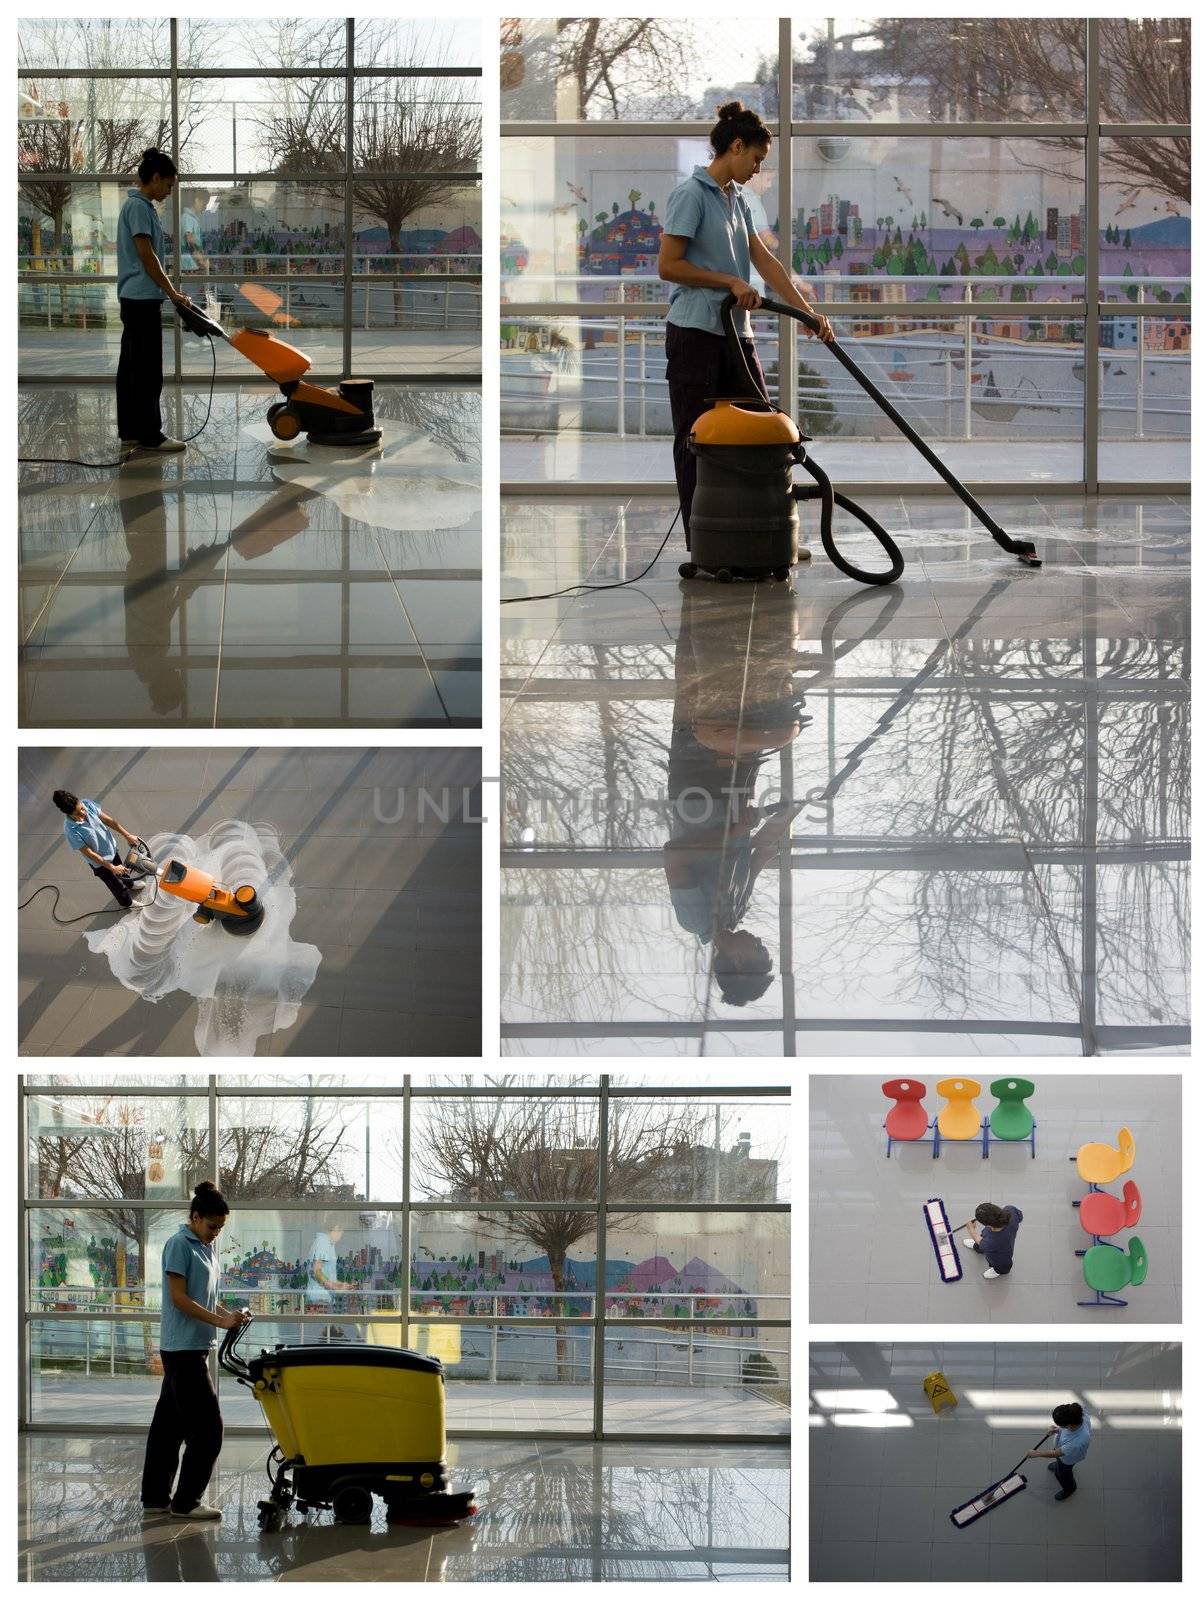 A worker is cleaning the floor with equipment by senkaya